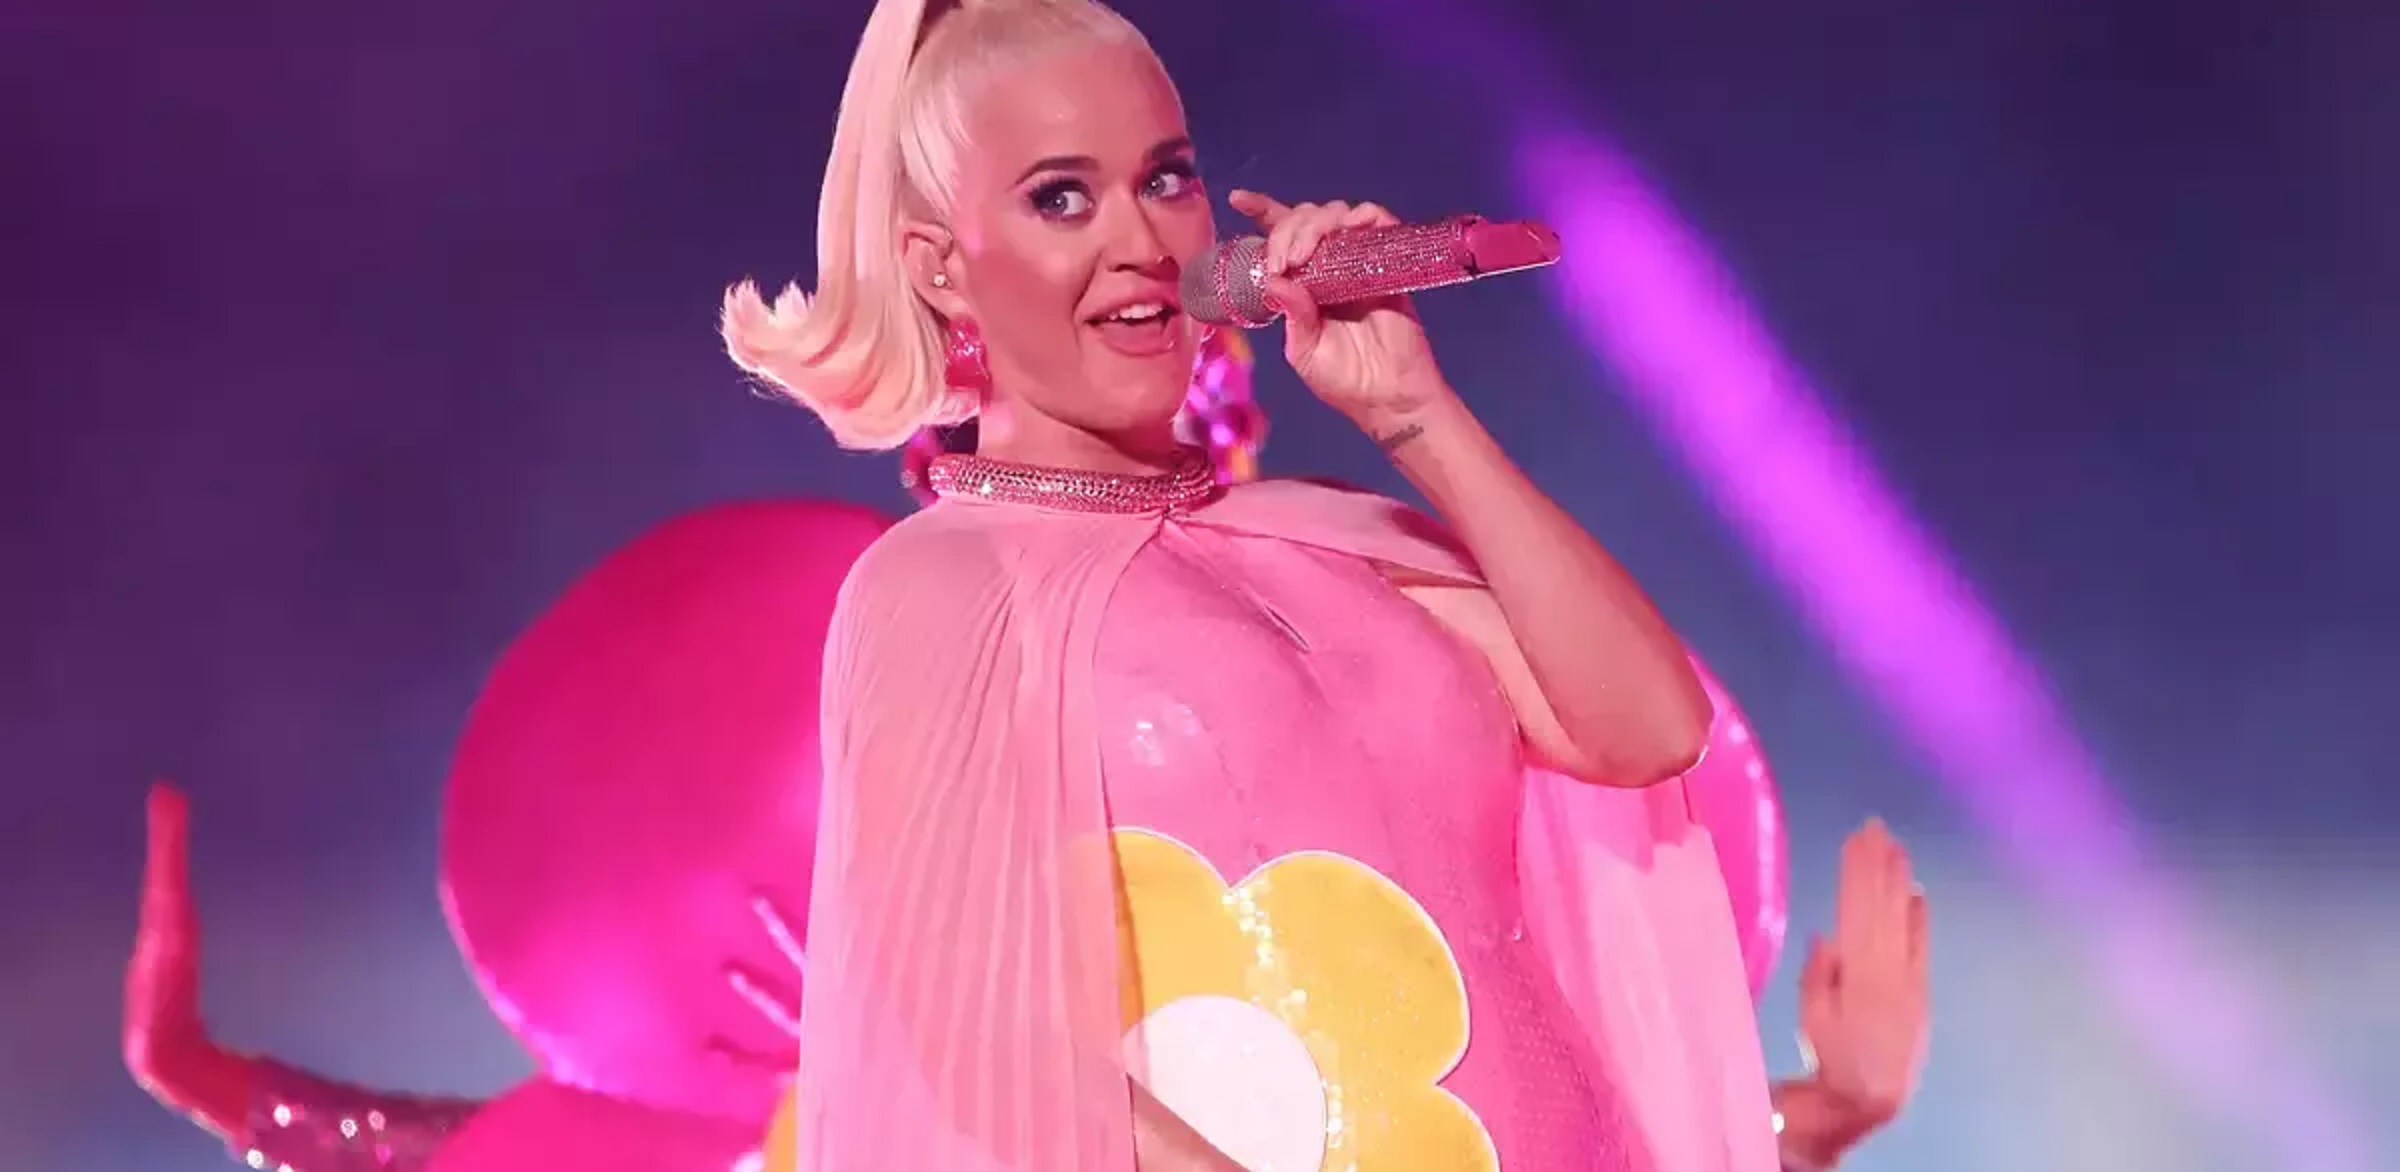 Watch: Katy Perry’s Fantastic Medley Performance From Women’s T20 World Cup